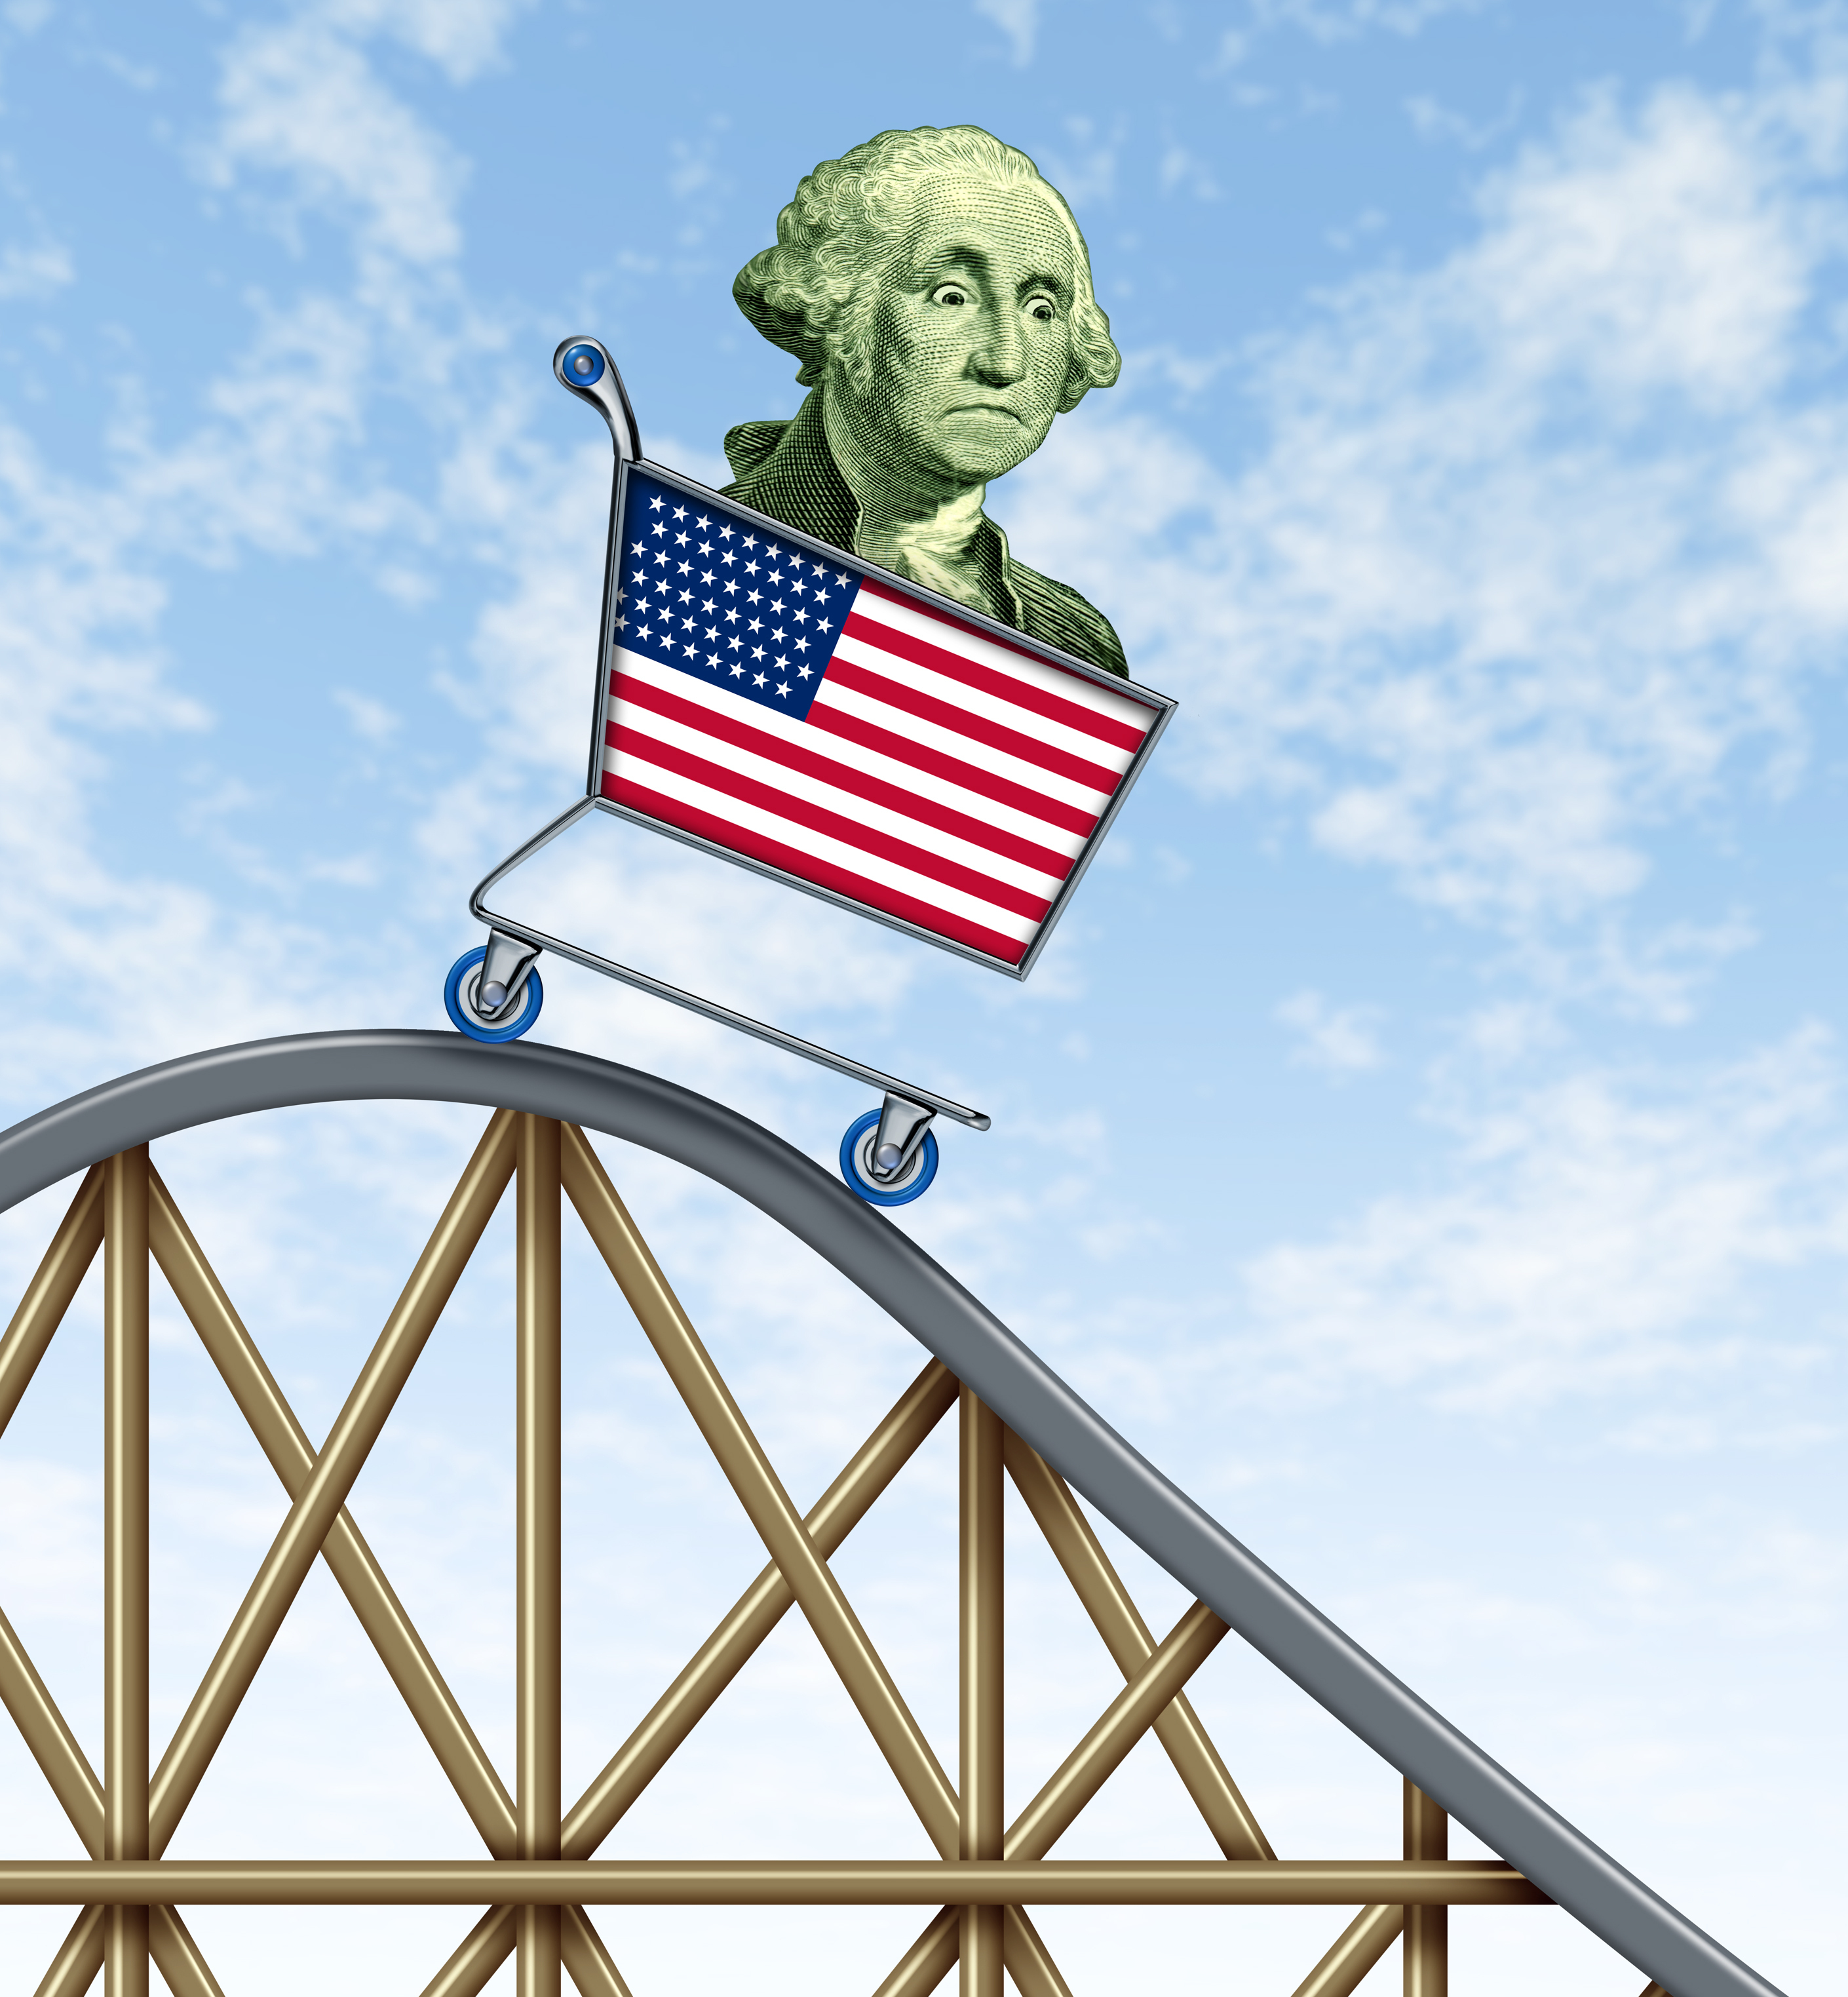 George Washington inside a grocery cart riding down the roller coaster